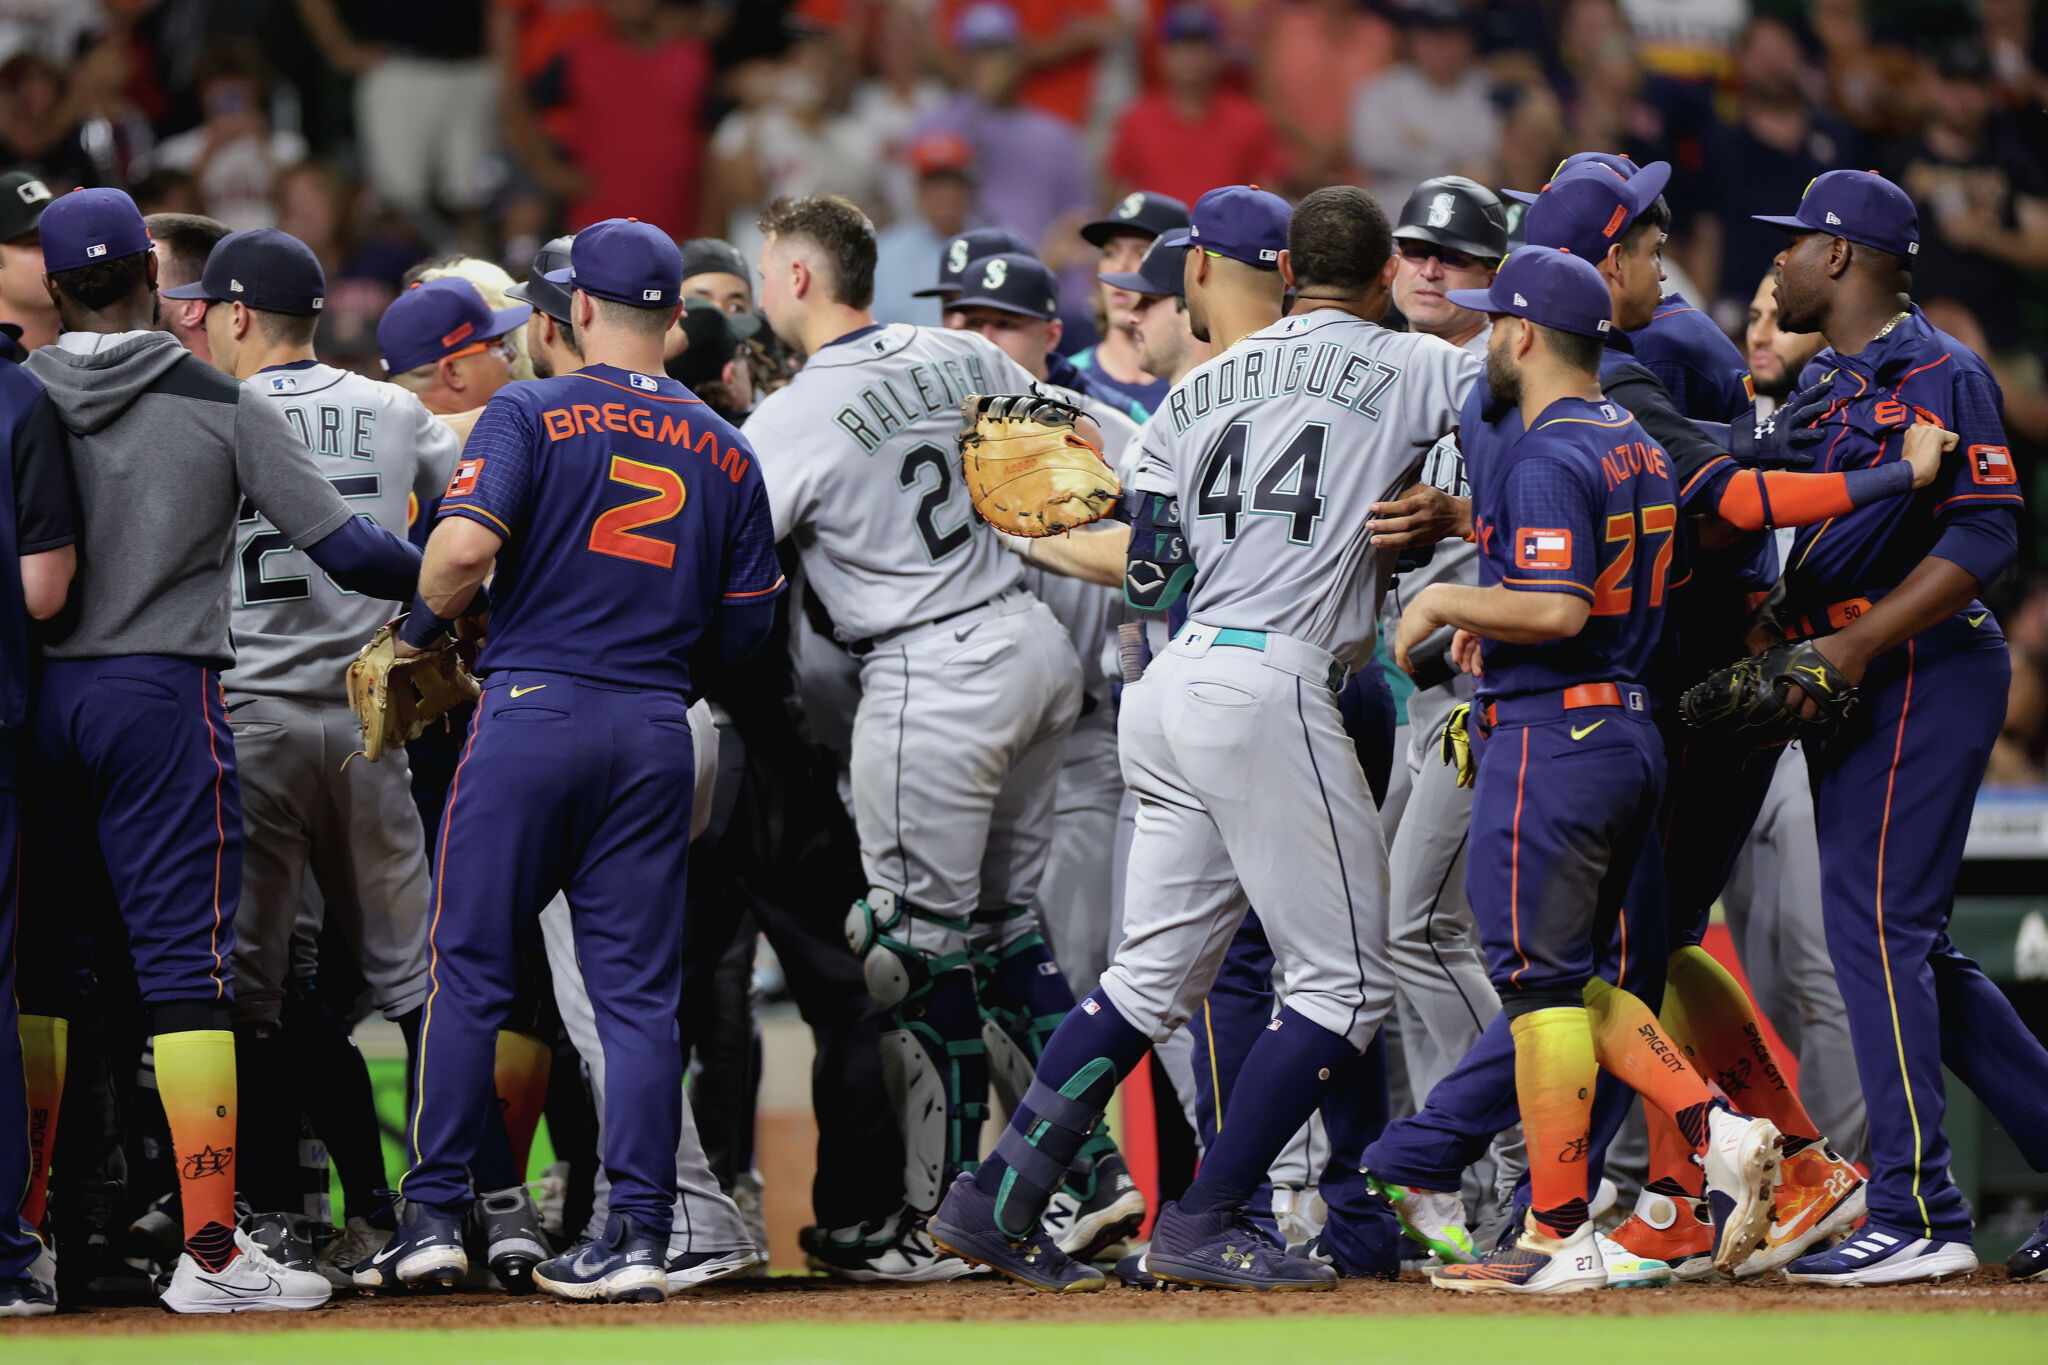 Social Media's Reaction to Monday's Mariners/Astros Benches-Clearing  Incident - Fastball